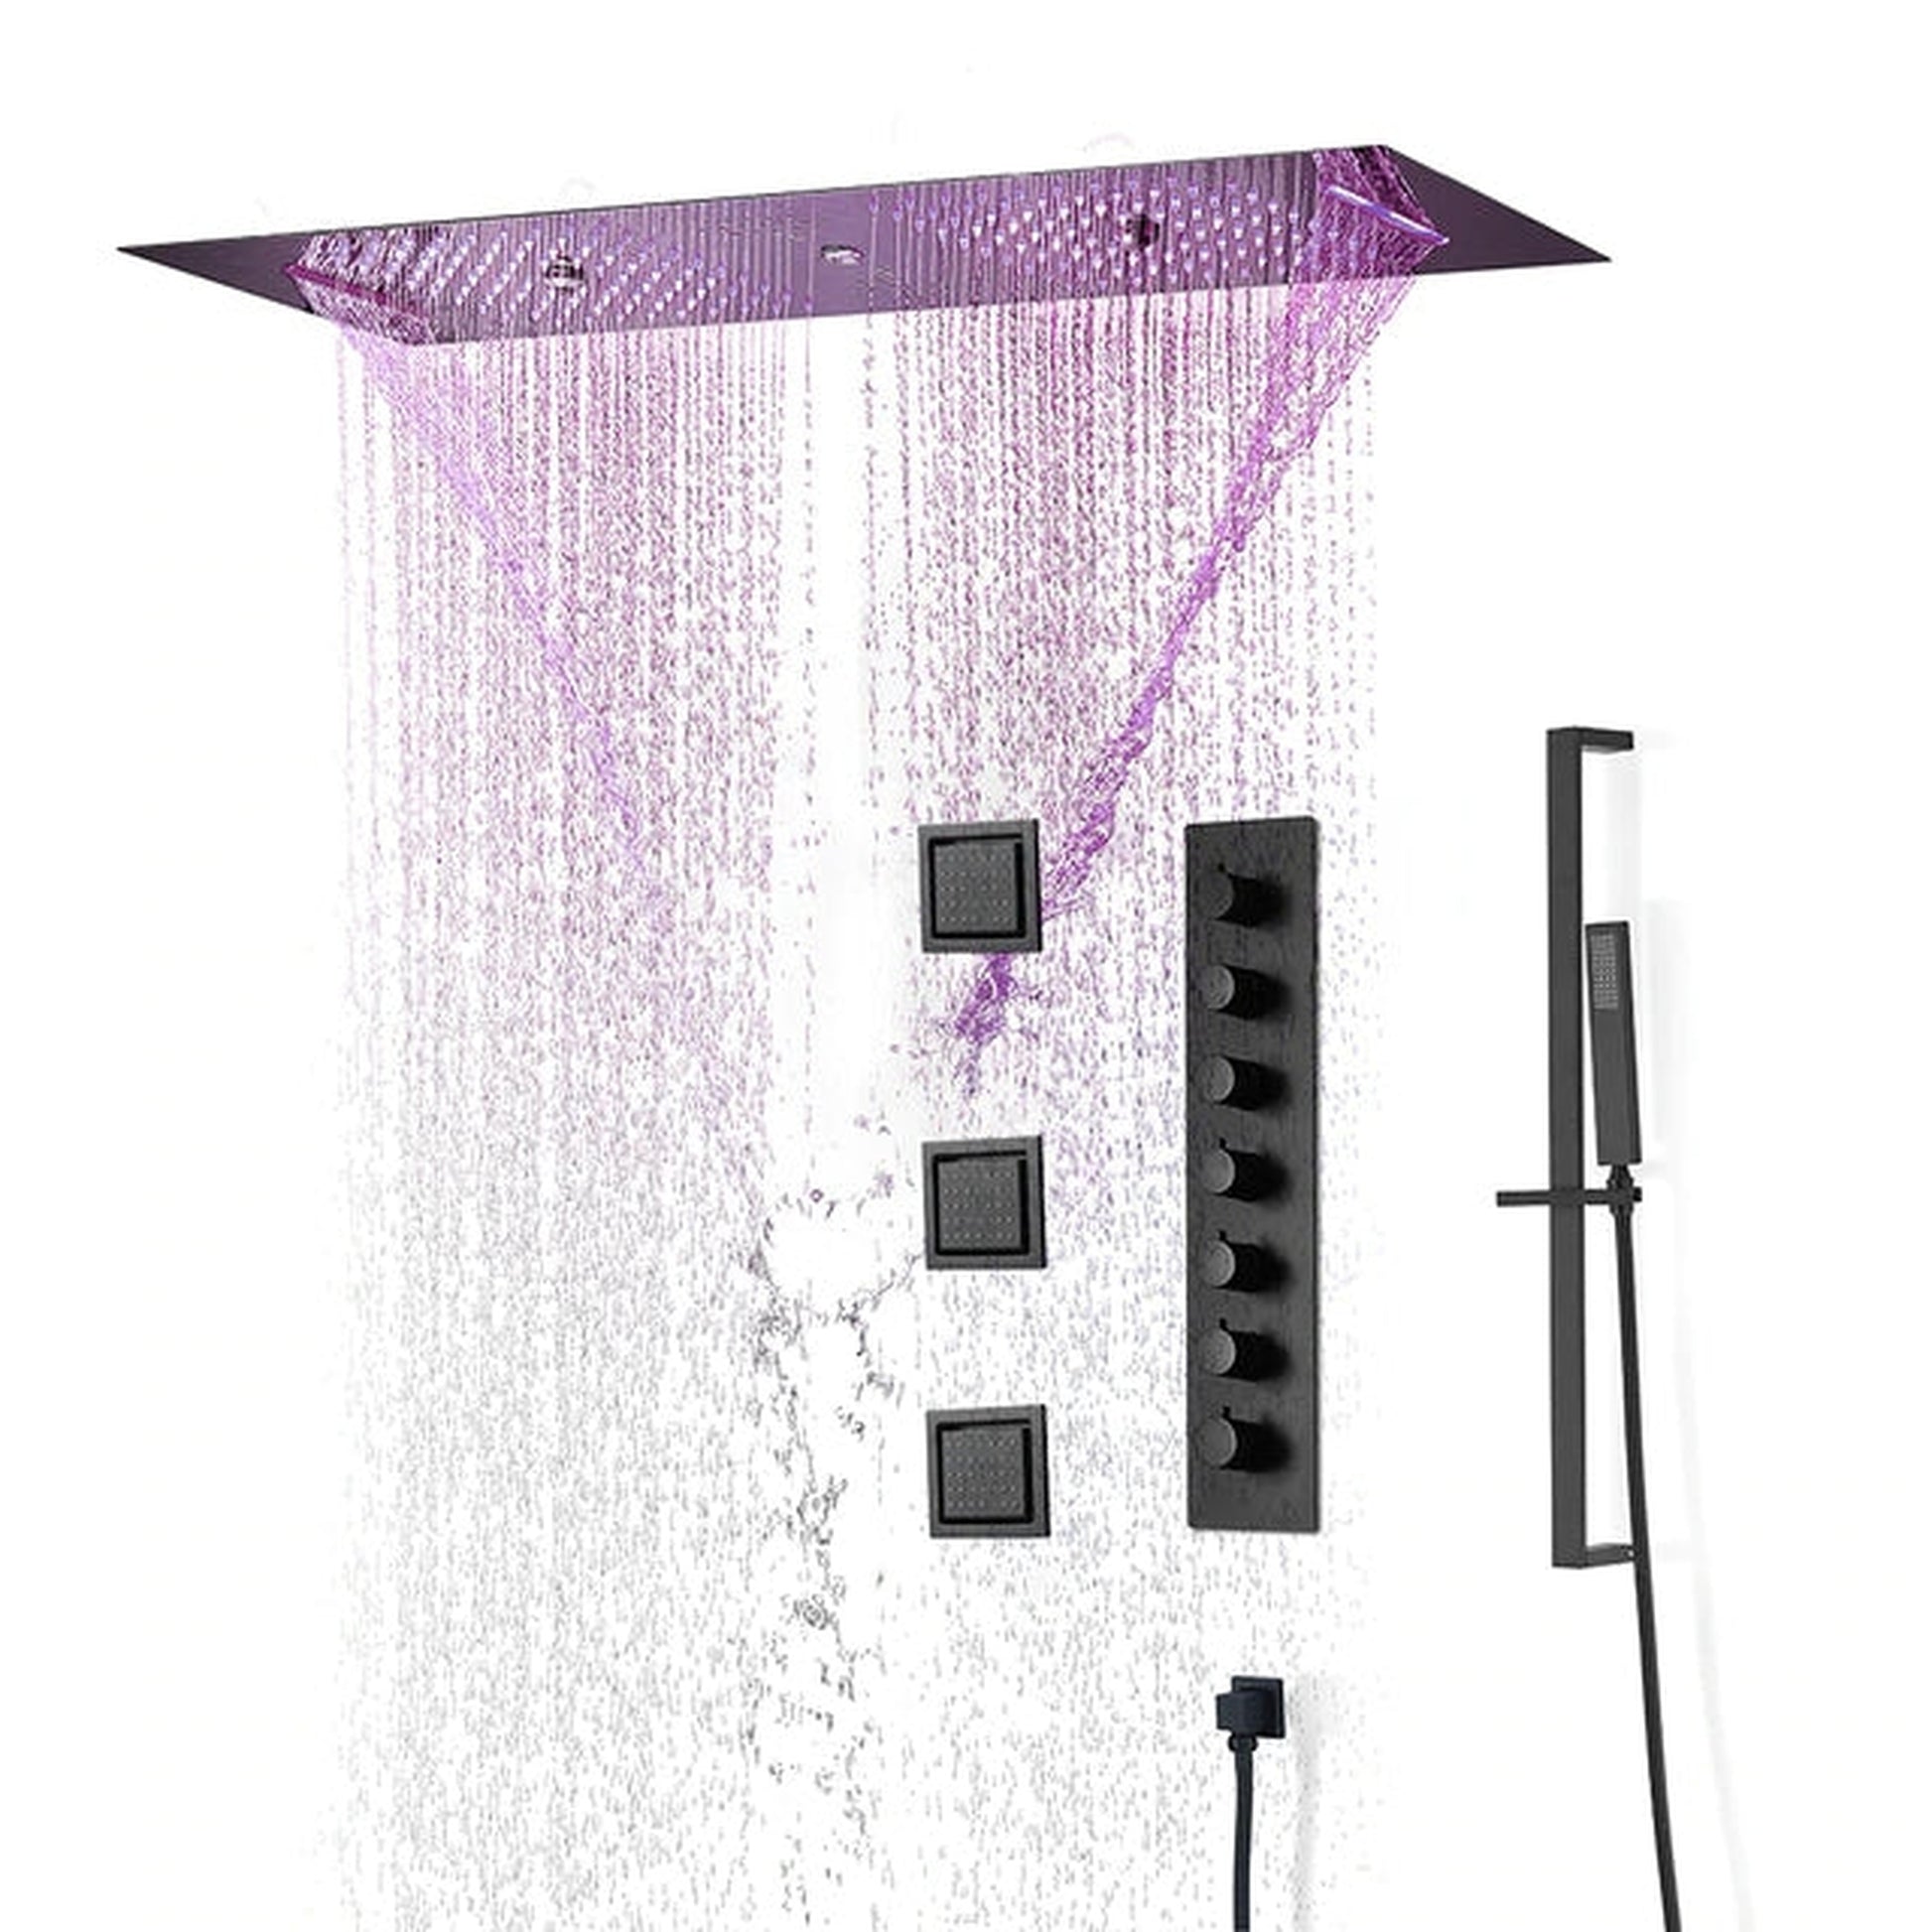 Fontana Ravenna Matte Black Large Recessed Ceiling Mounted Phone Controlled Thermostatic Musical LED Mist Waterfall Rainfall Shower System With Hand Shower and 3-Jet Body Sprays